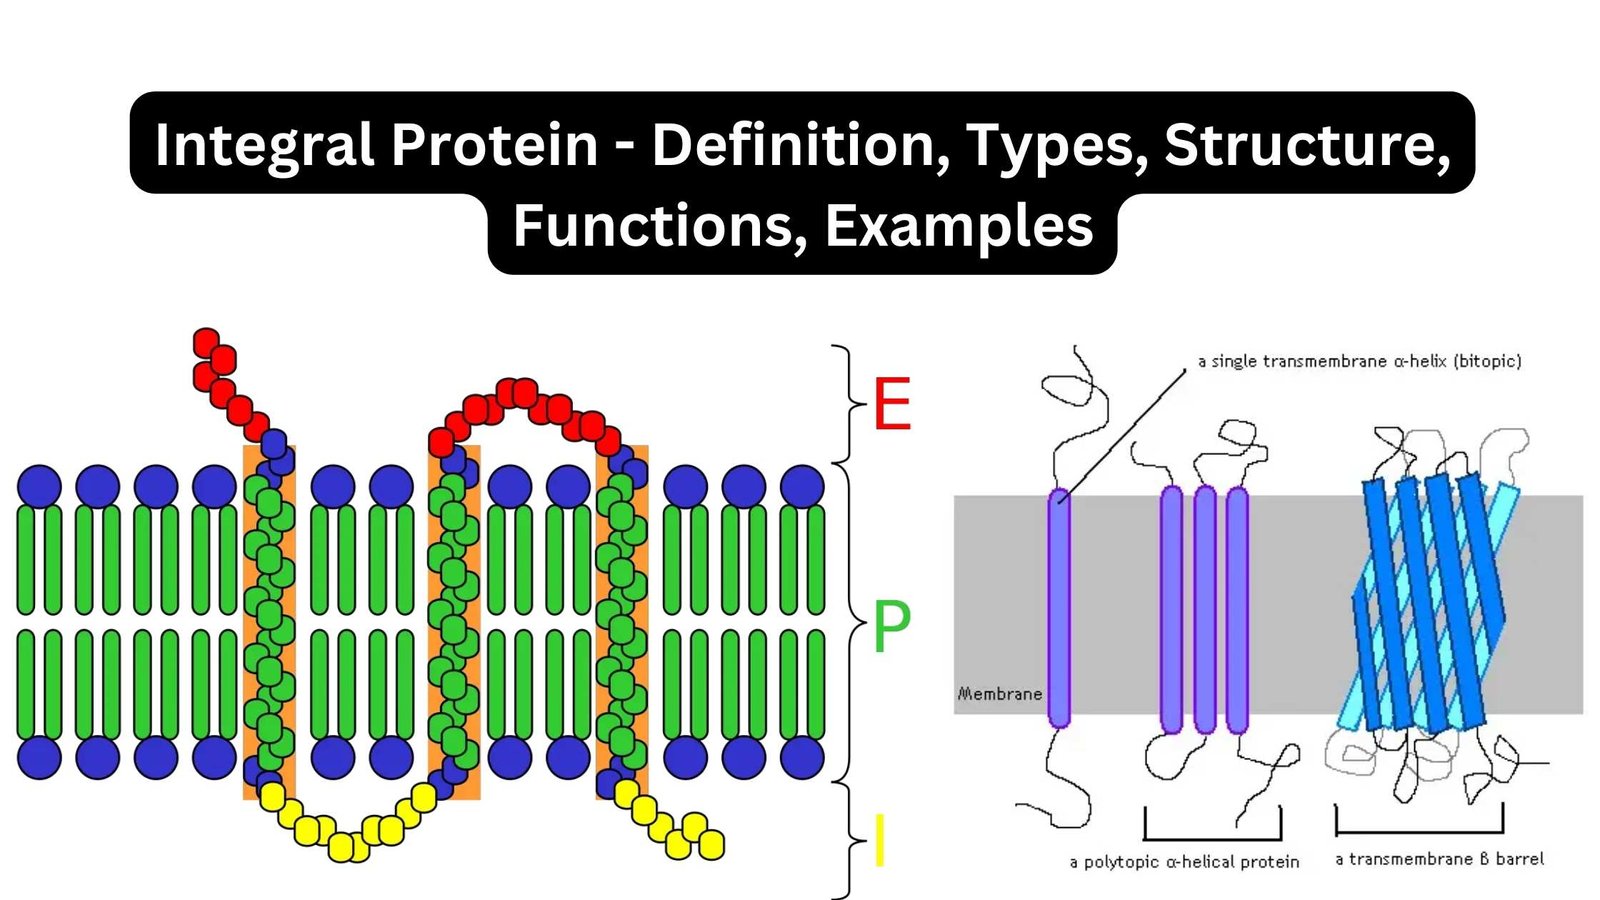 Integral Protein - Definition, Types, Structure, Functions, Examples